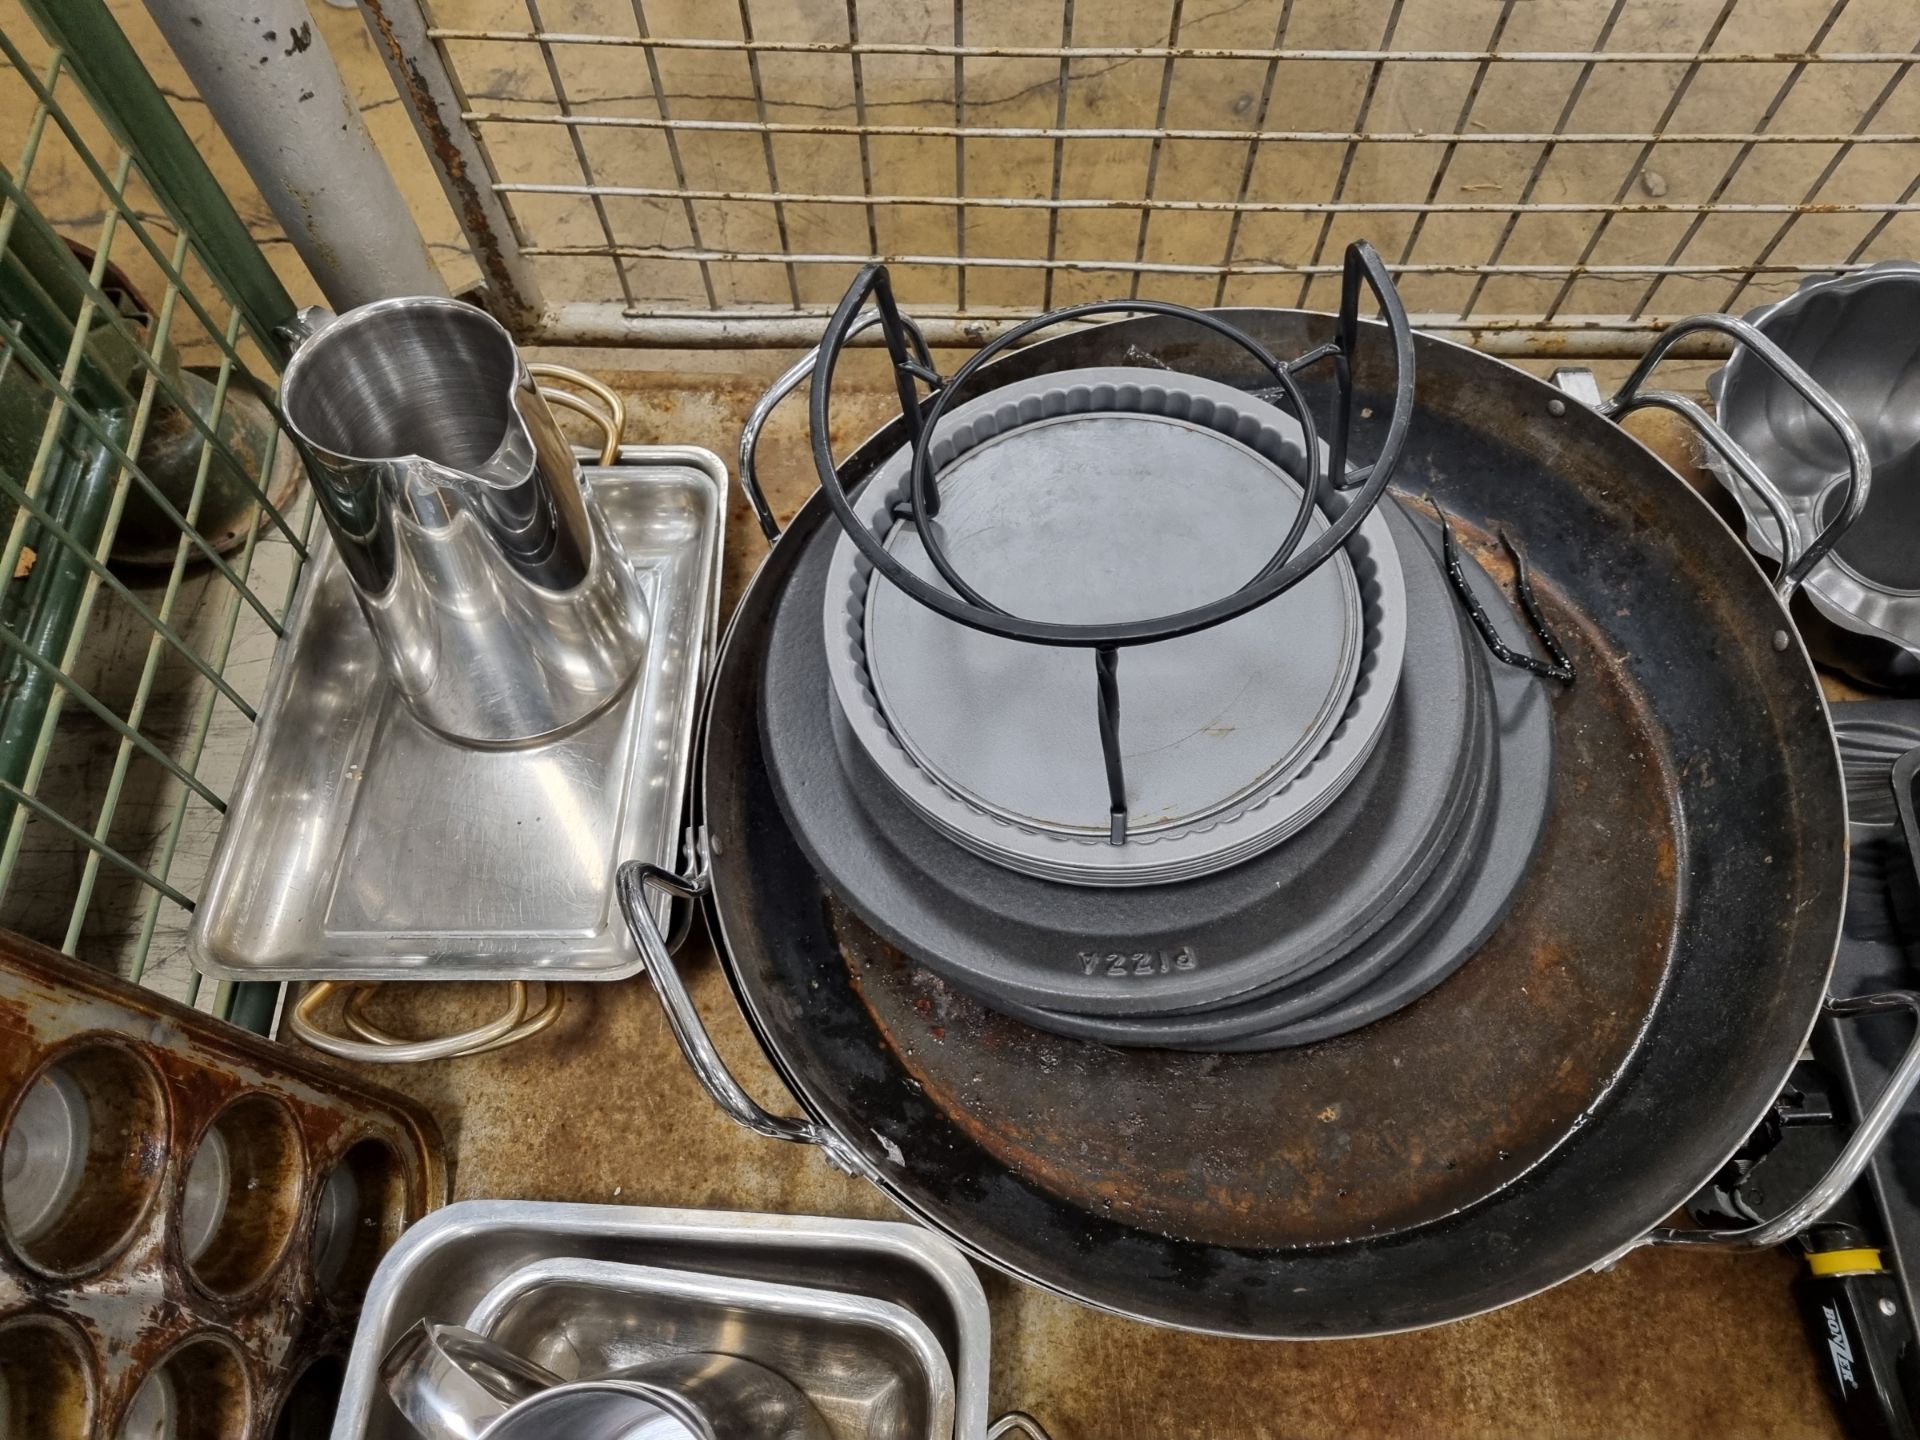 Catering equipment and supplies consisting of kitchen utensils, moulds,jugs,containers - Image 2 of 5